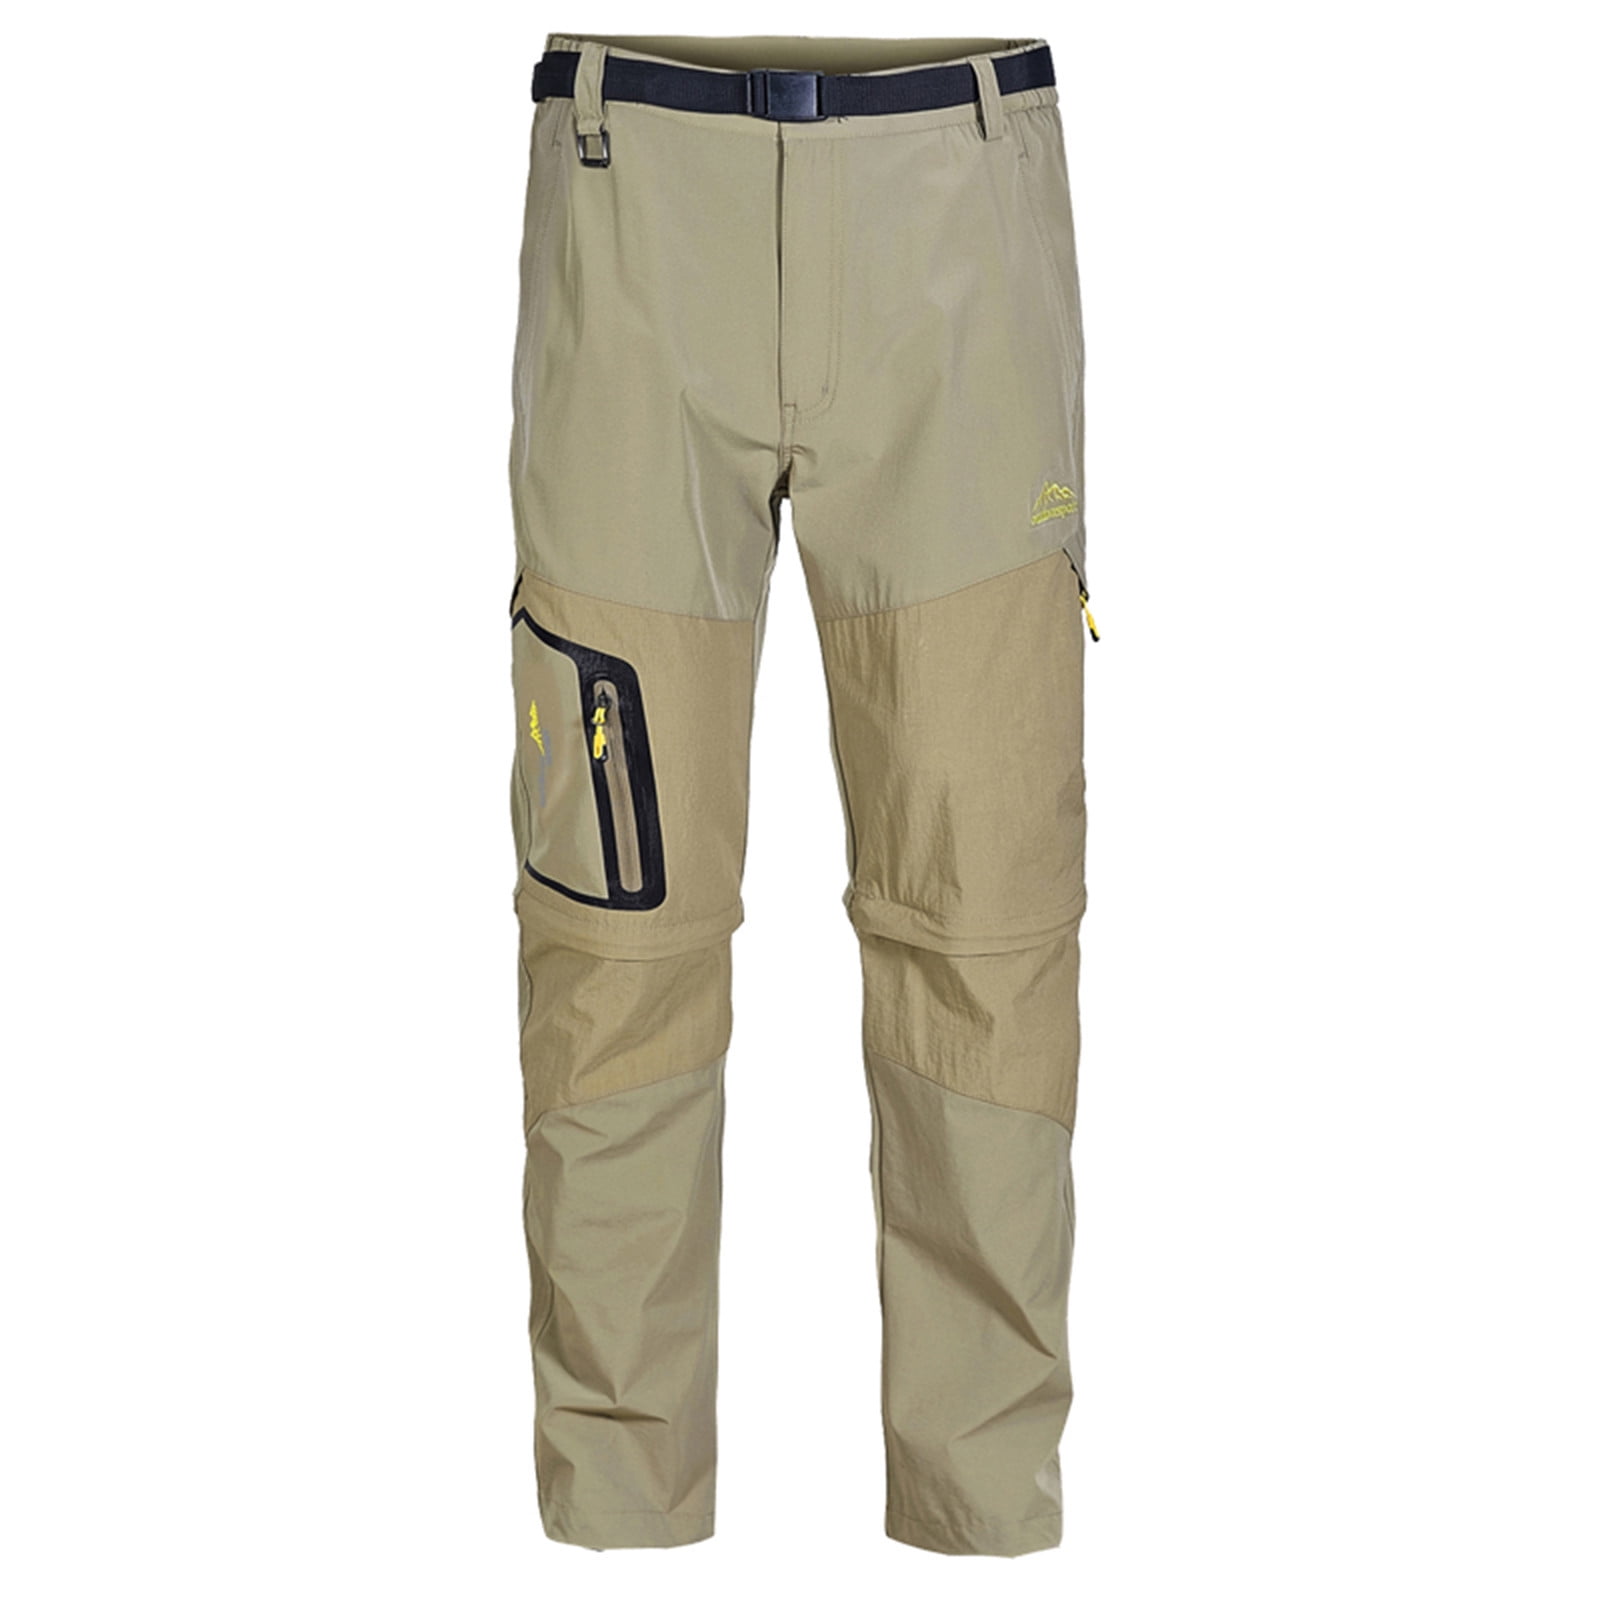 Jacenvly Cargo Pants for Men Work Clearance Long Cargo Pants